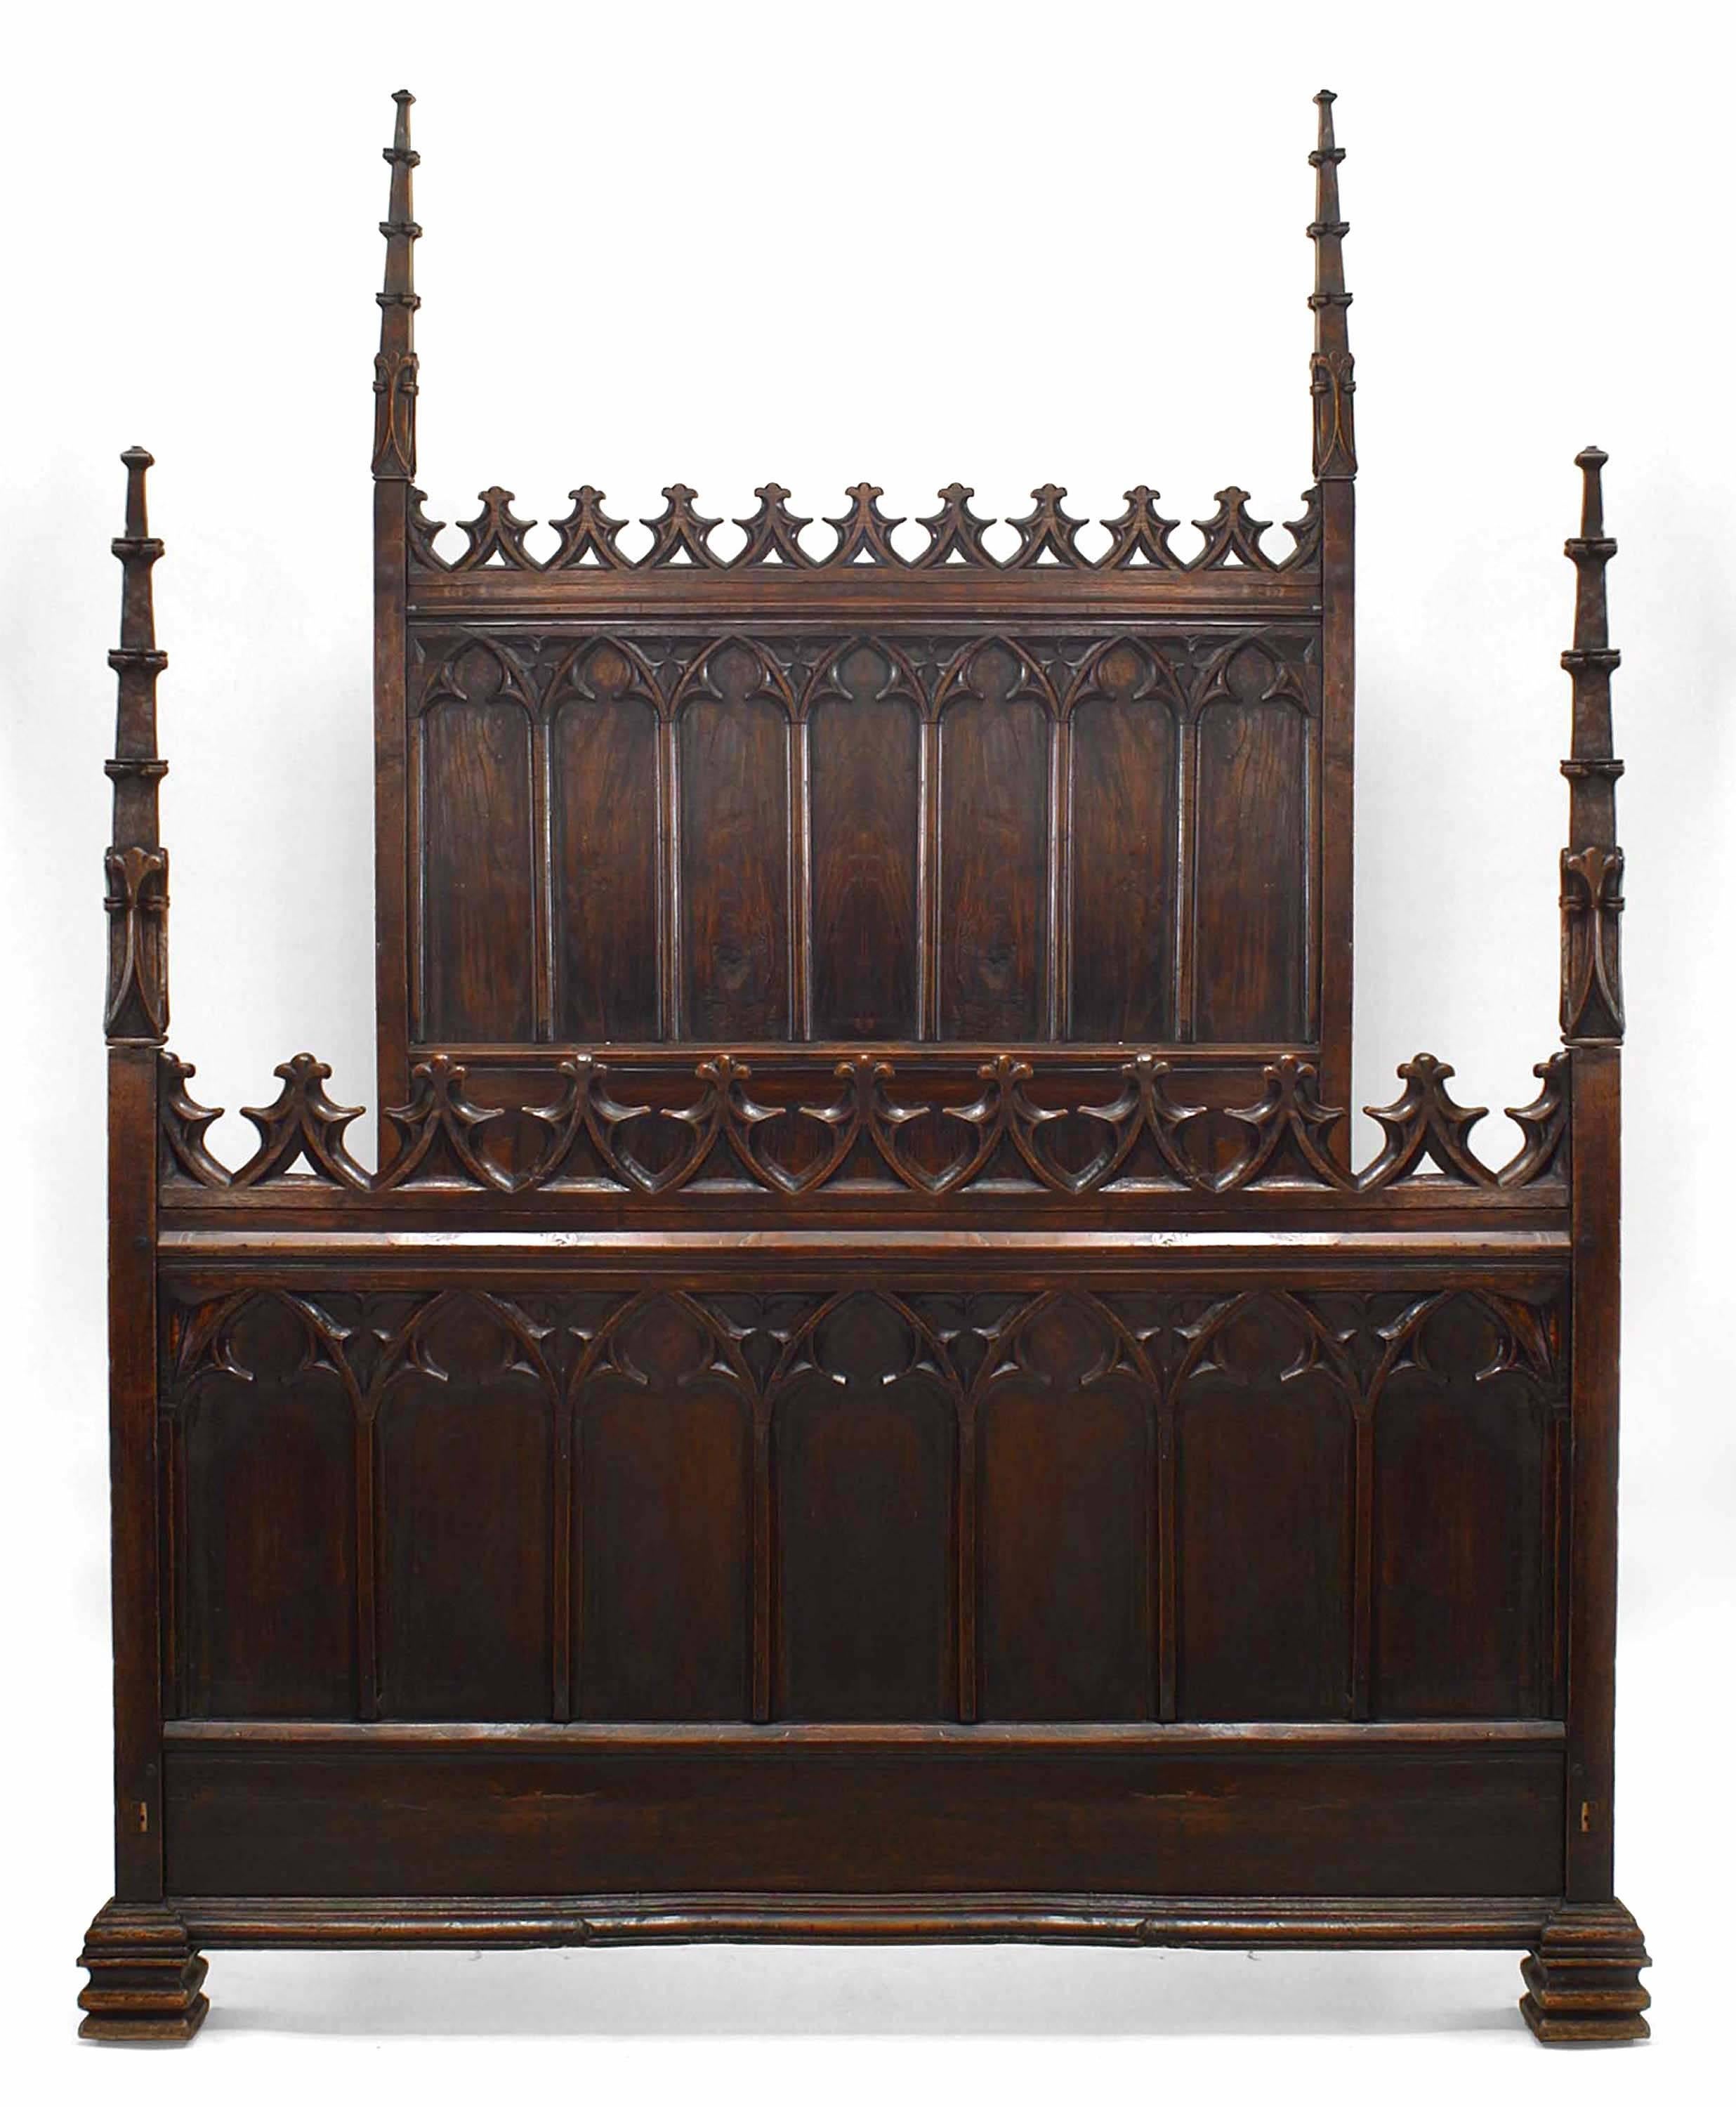 English Gothic Revival-style (19th Century) walnut full size bed with carved finial posts. (Includes: headboard, footboard, rails)
